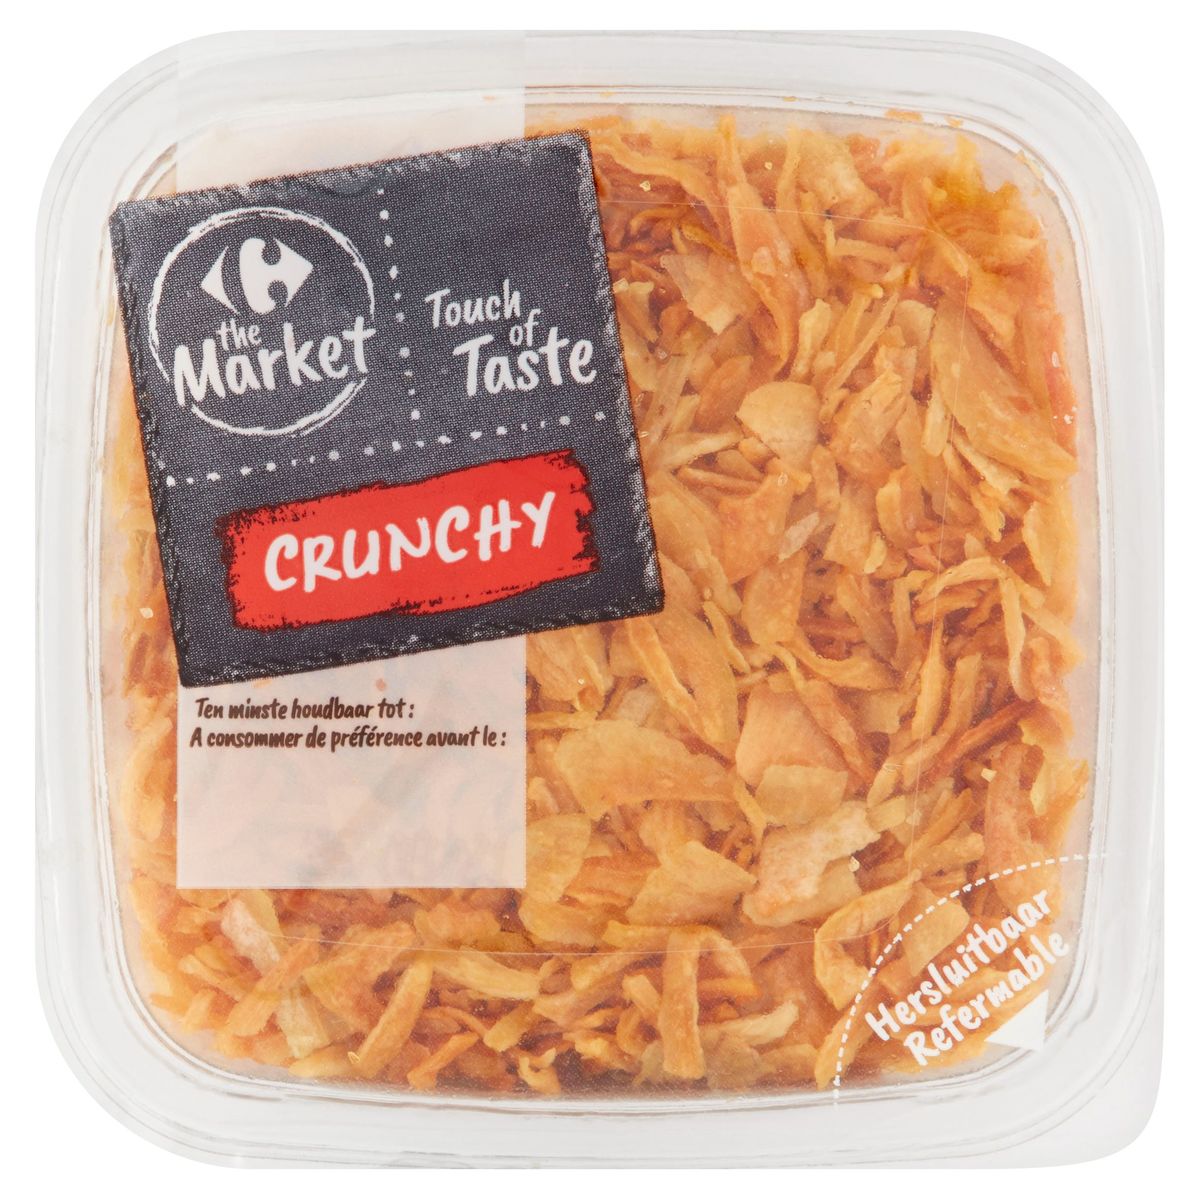 Carrefour The Market Touch of Taste Crunchy Oignons Frits 100 g